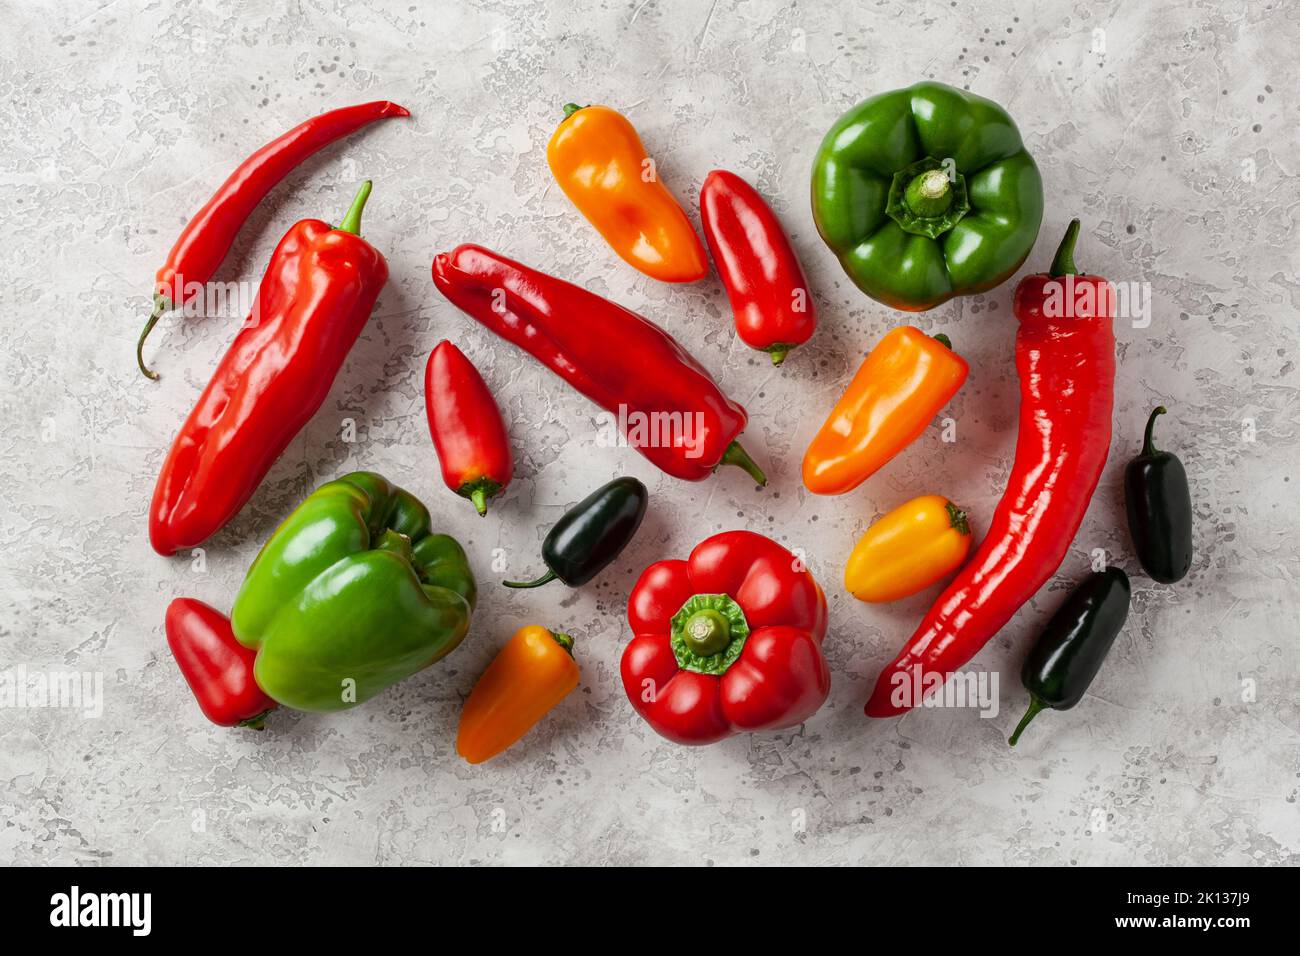 assorted red green and yellow bell peppers vegetables chili habanero Stock Photo